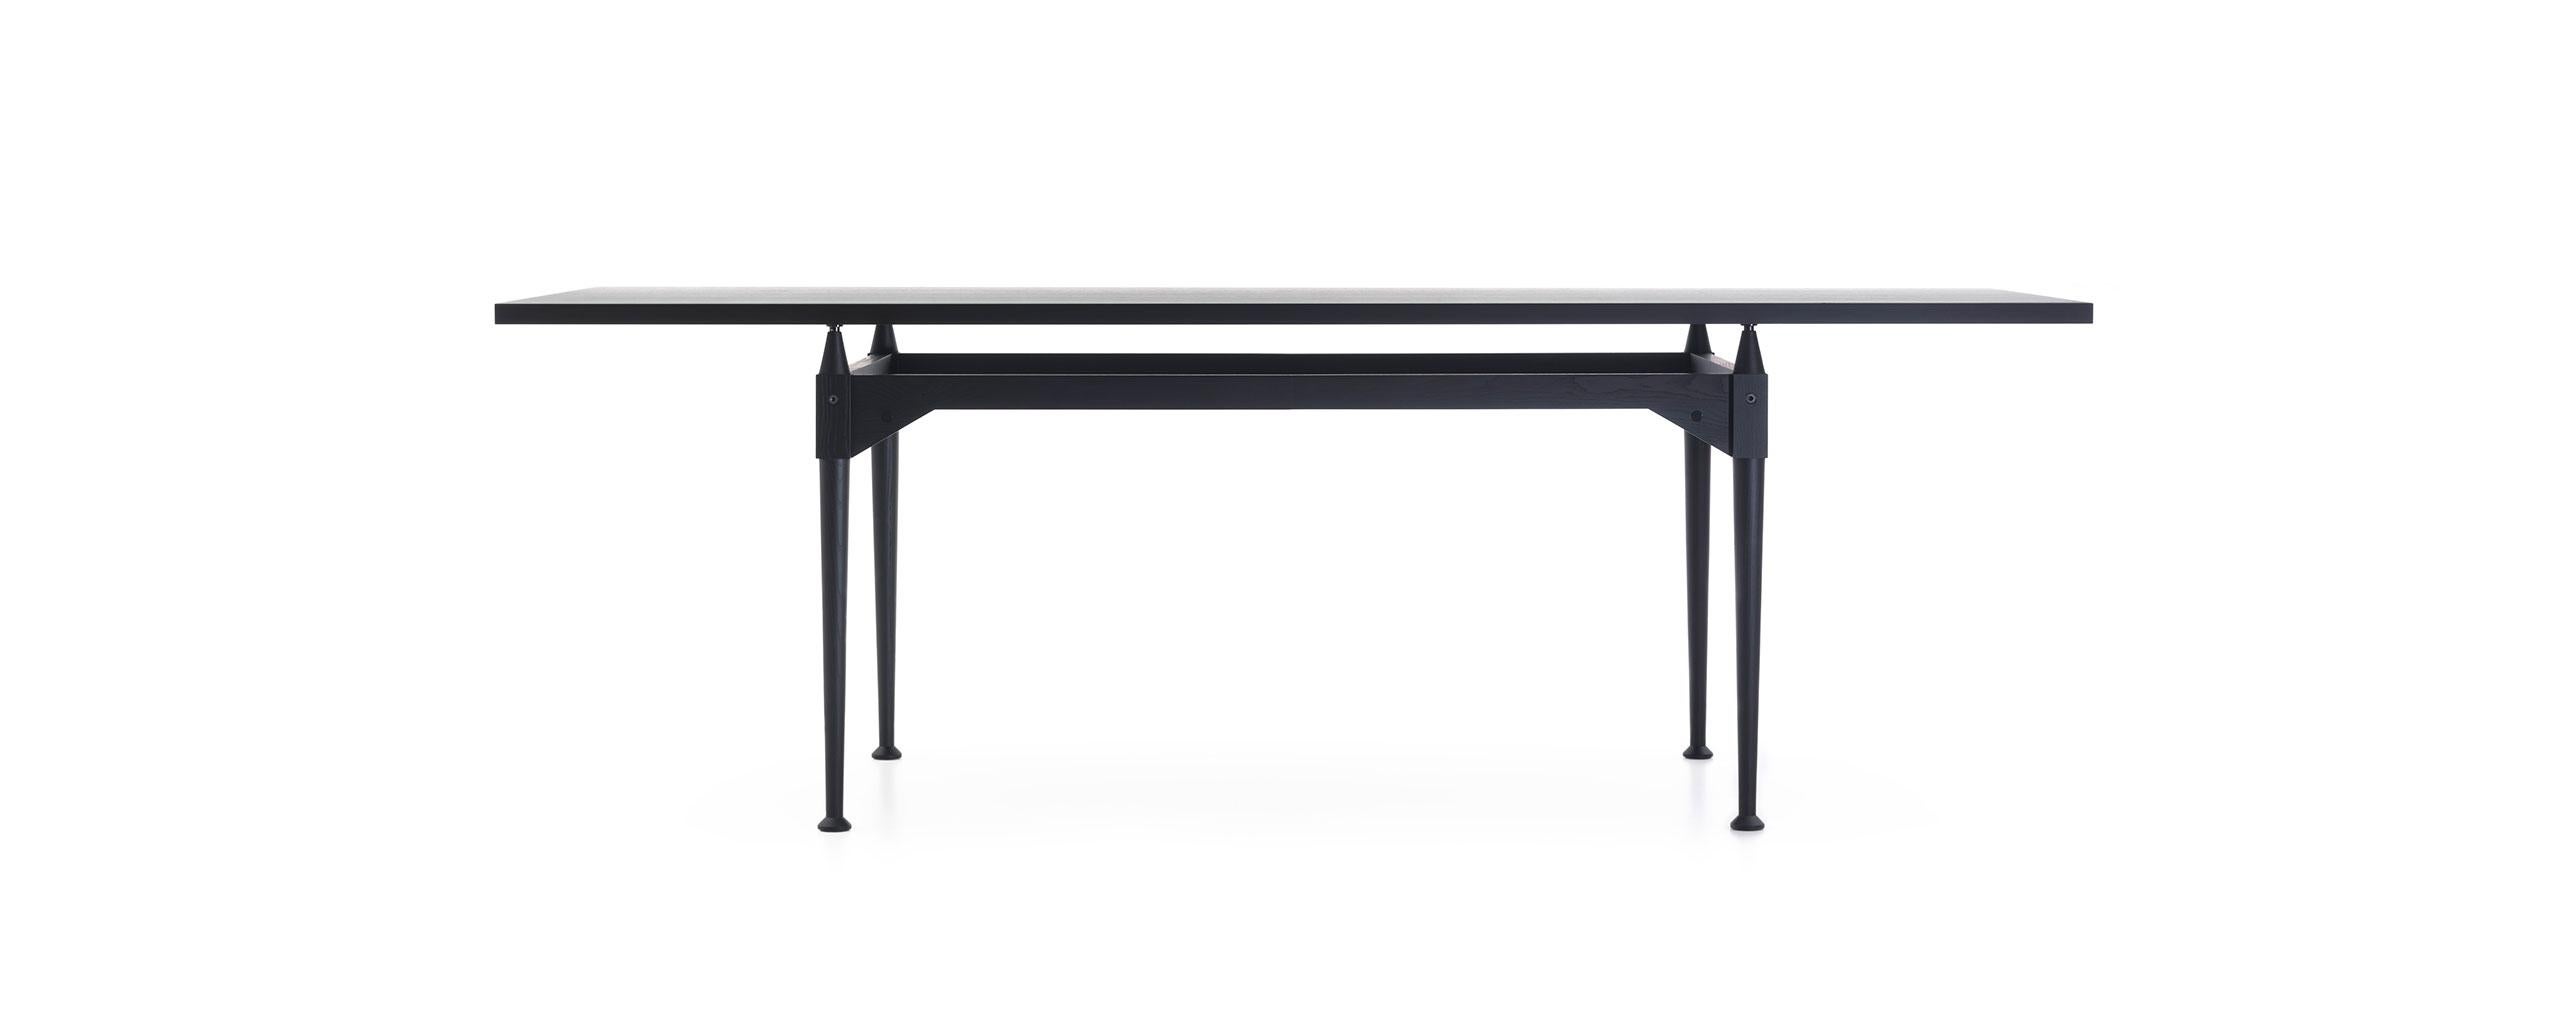 Table designed by Franco Albini in 1953. Relaunched in 2013.
Manufactured by Cassina in Italy.

Franco Albini designed this table using the strut element that he had already employed in the design of the Veliero and Infinito bookshelves. In this